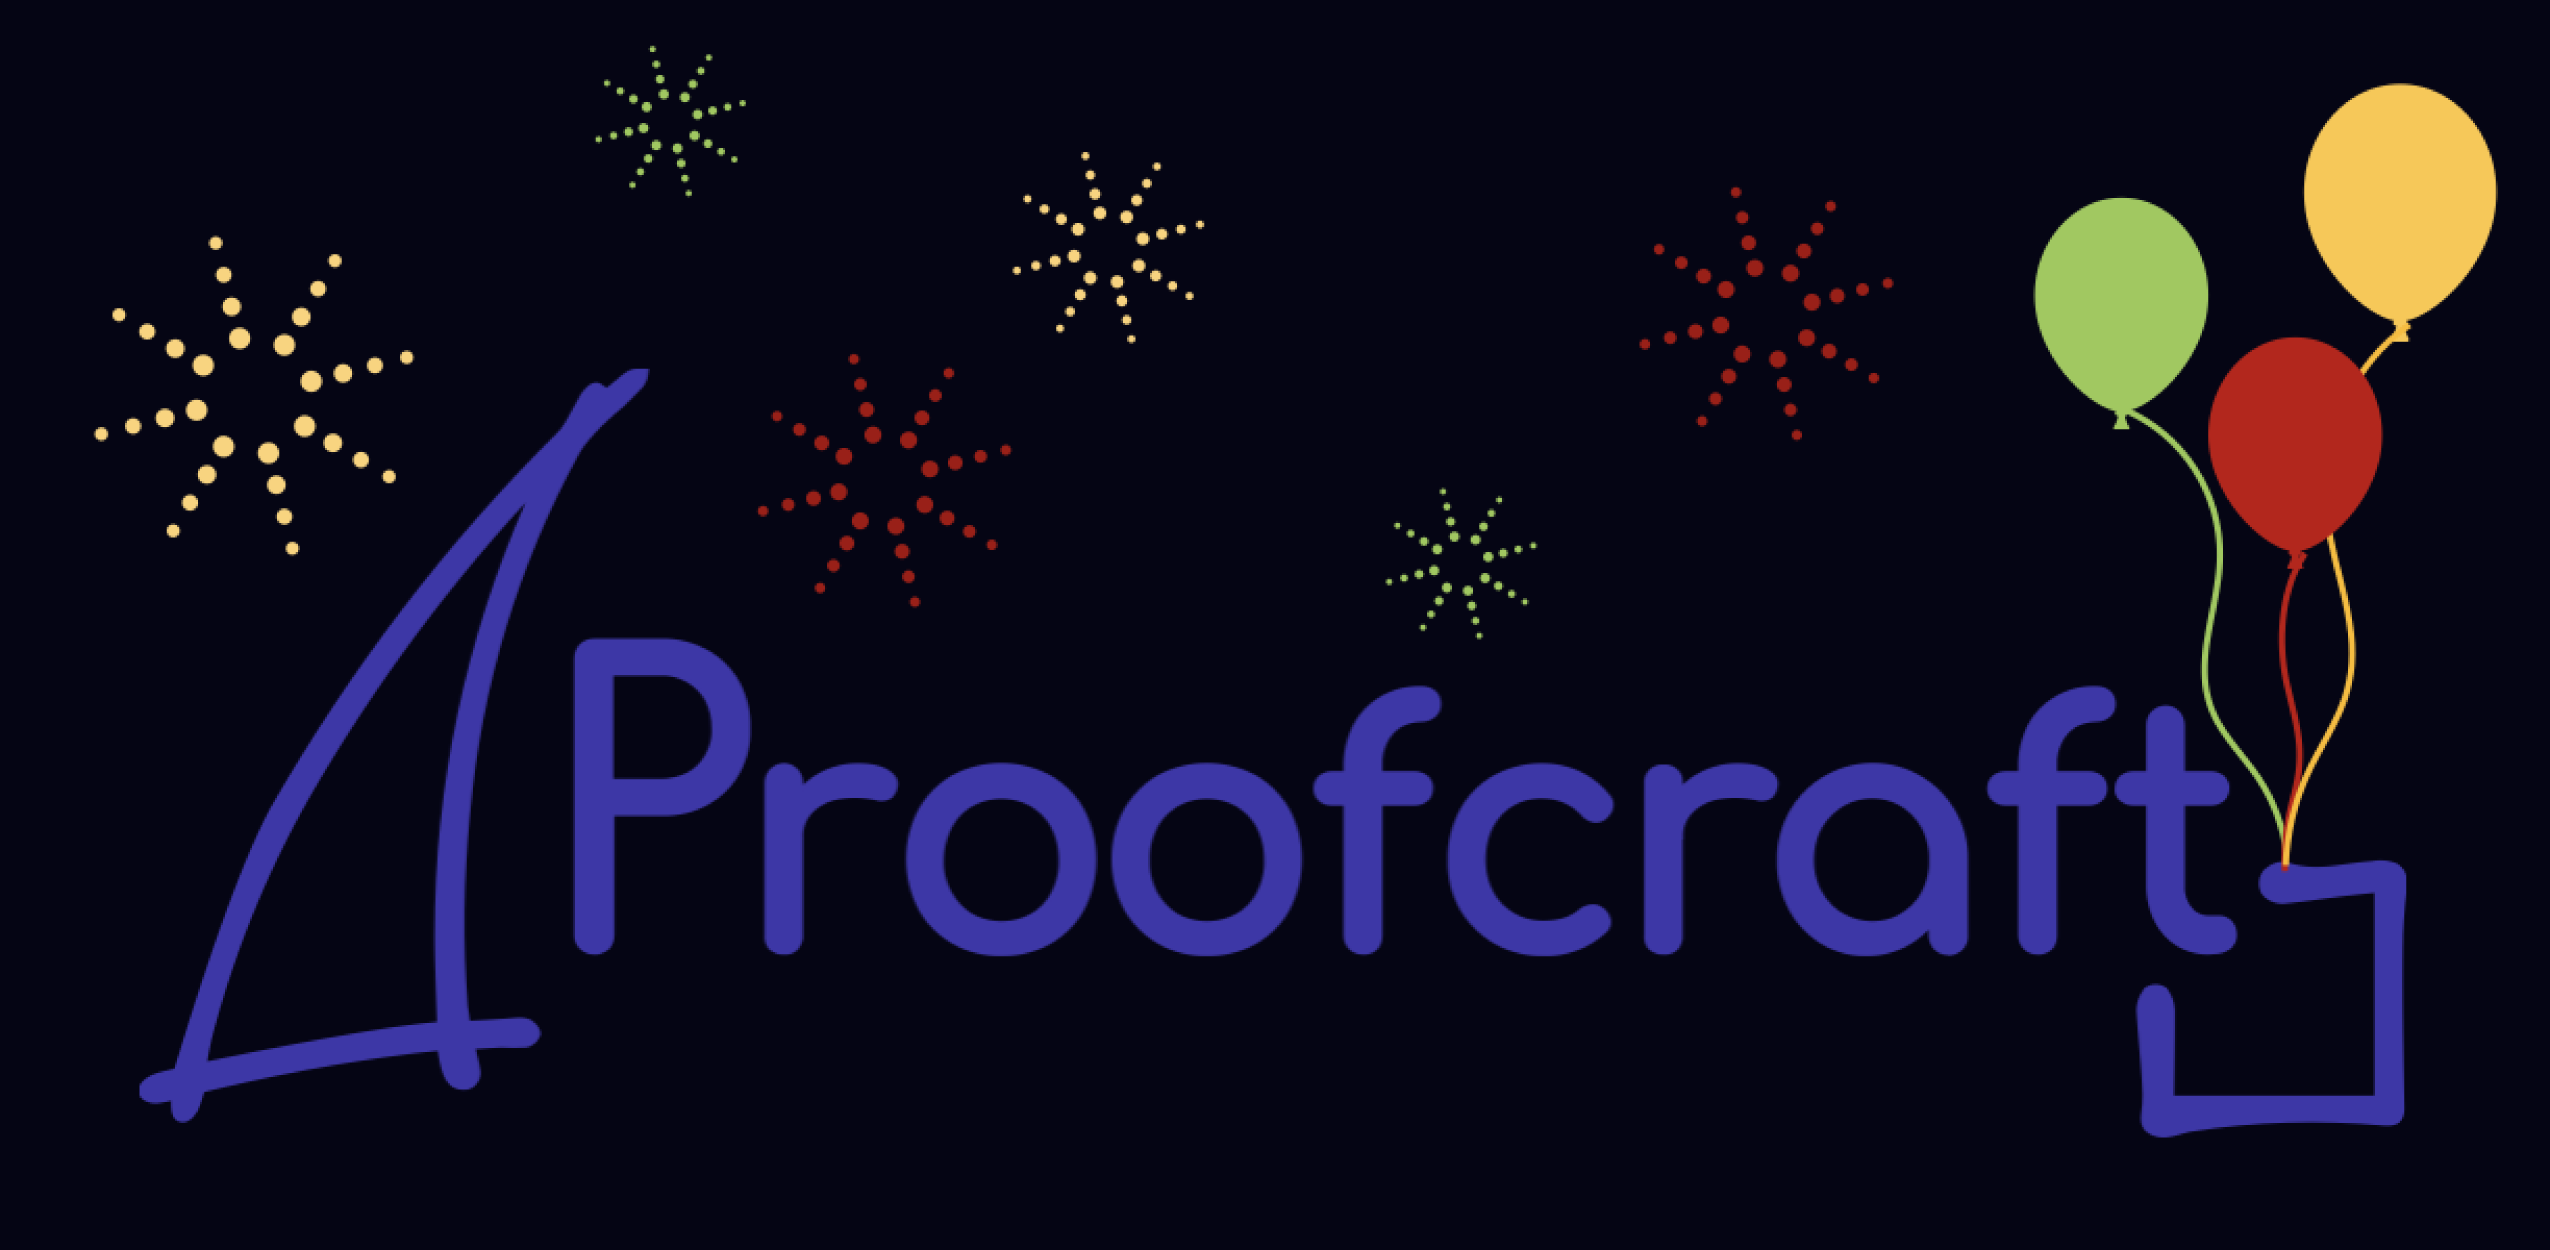 Proofcraft is 3 years old